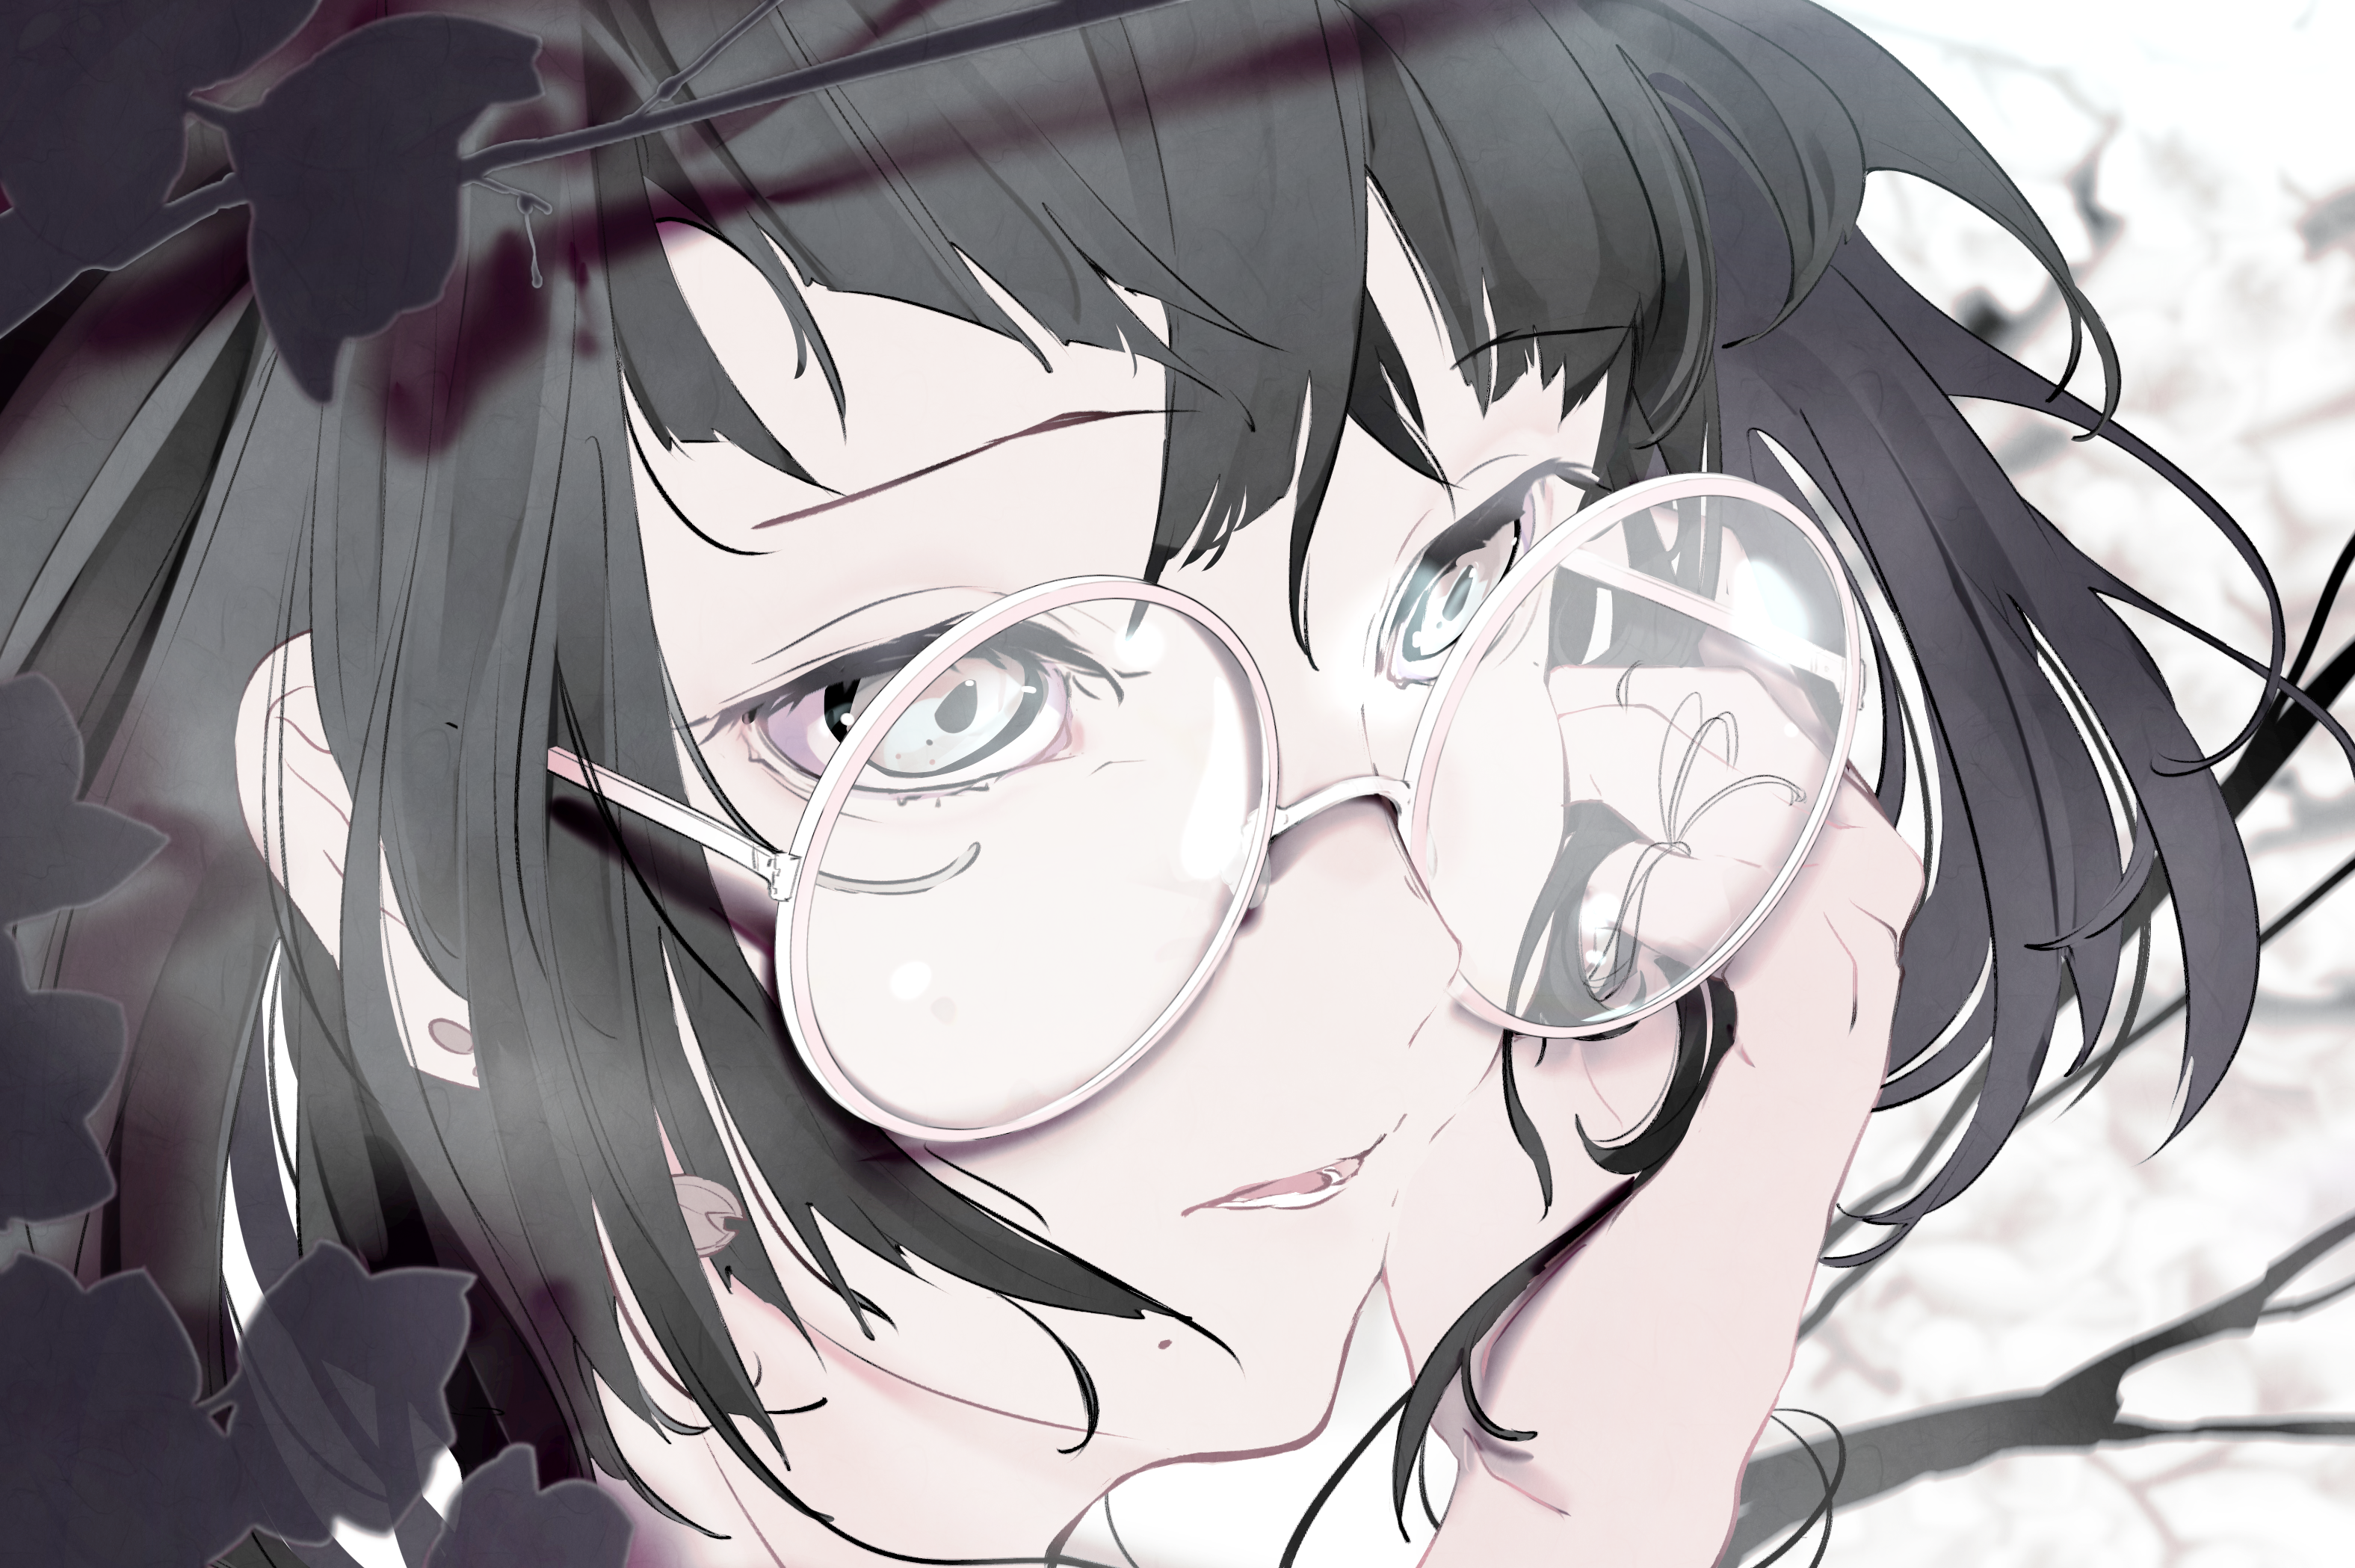 Anime 3151x2098 glasses anime girls anime closeup face women with glasses